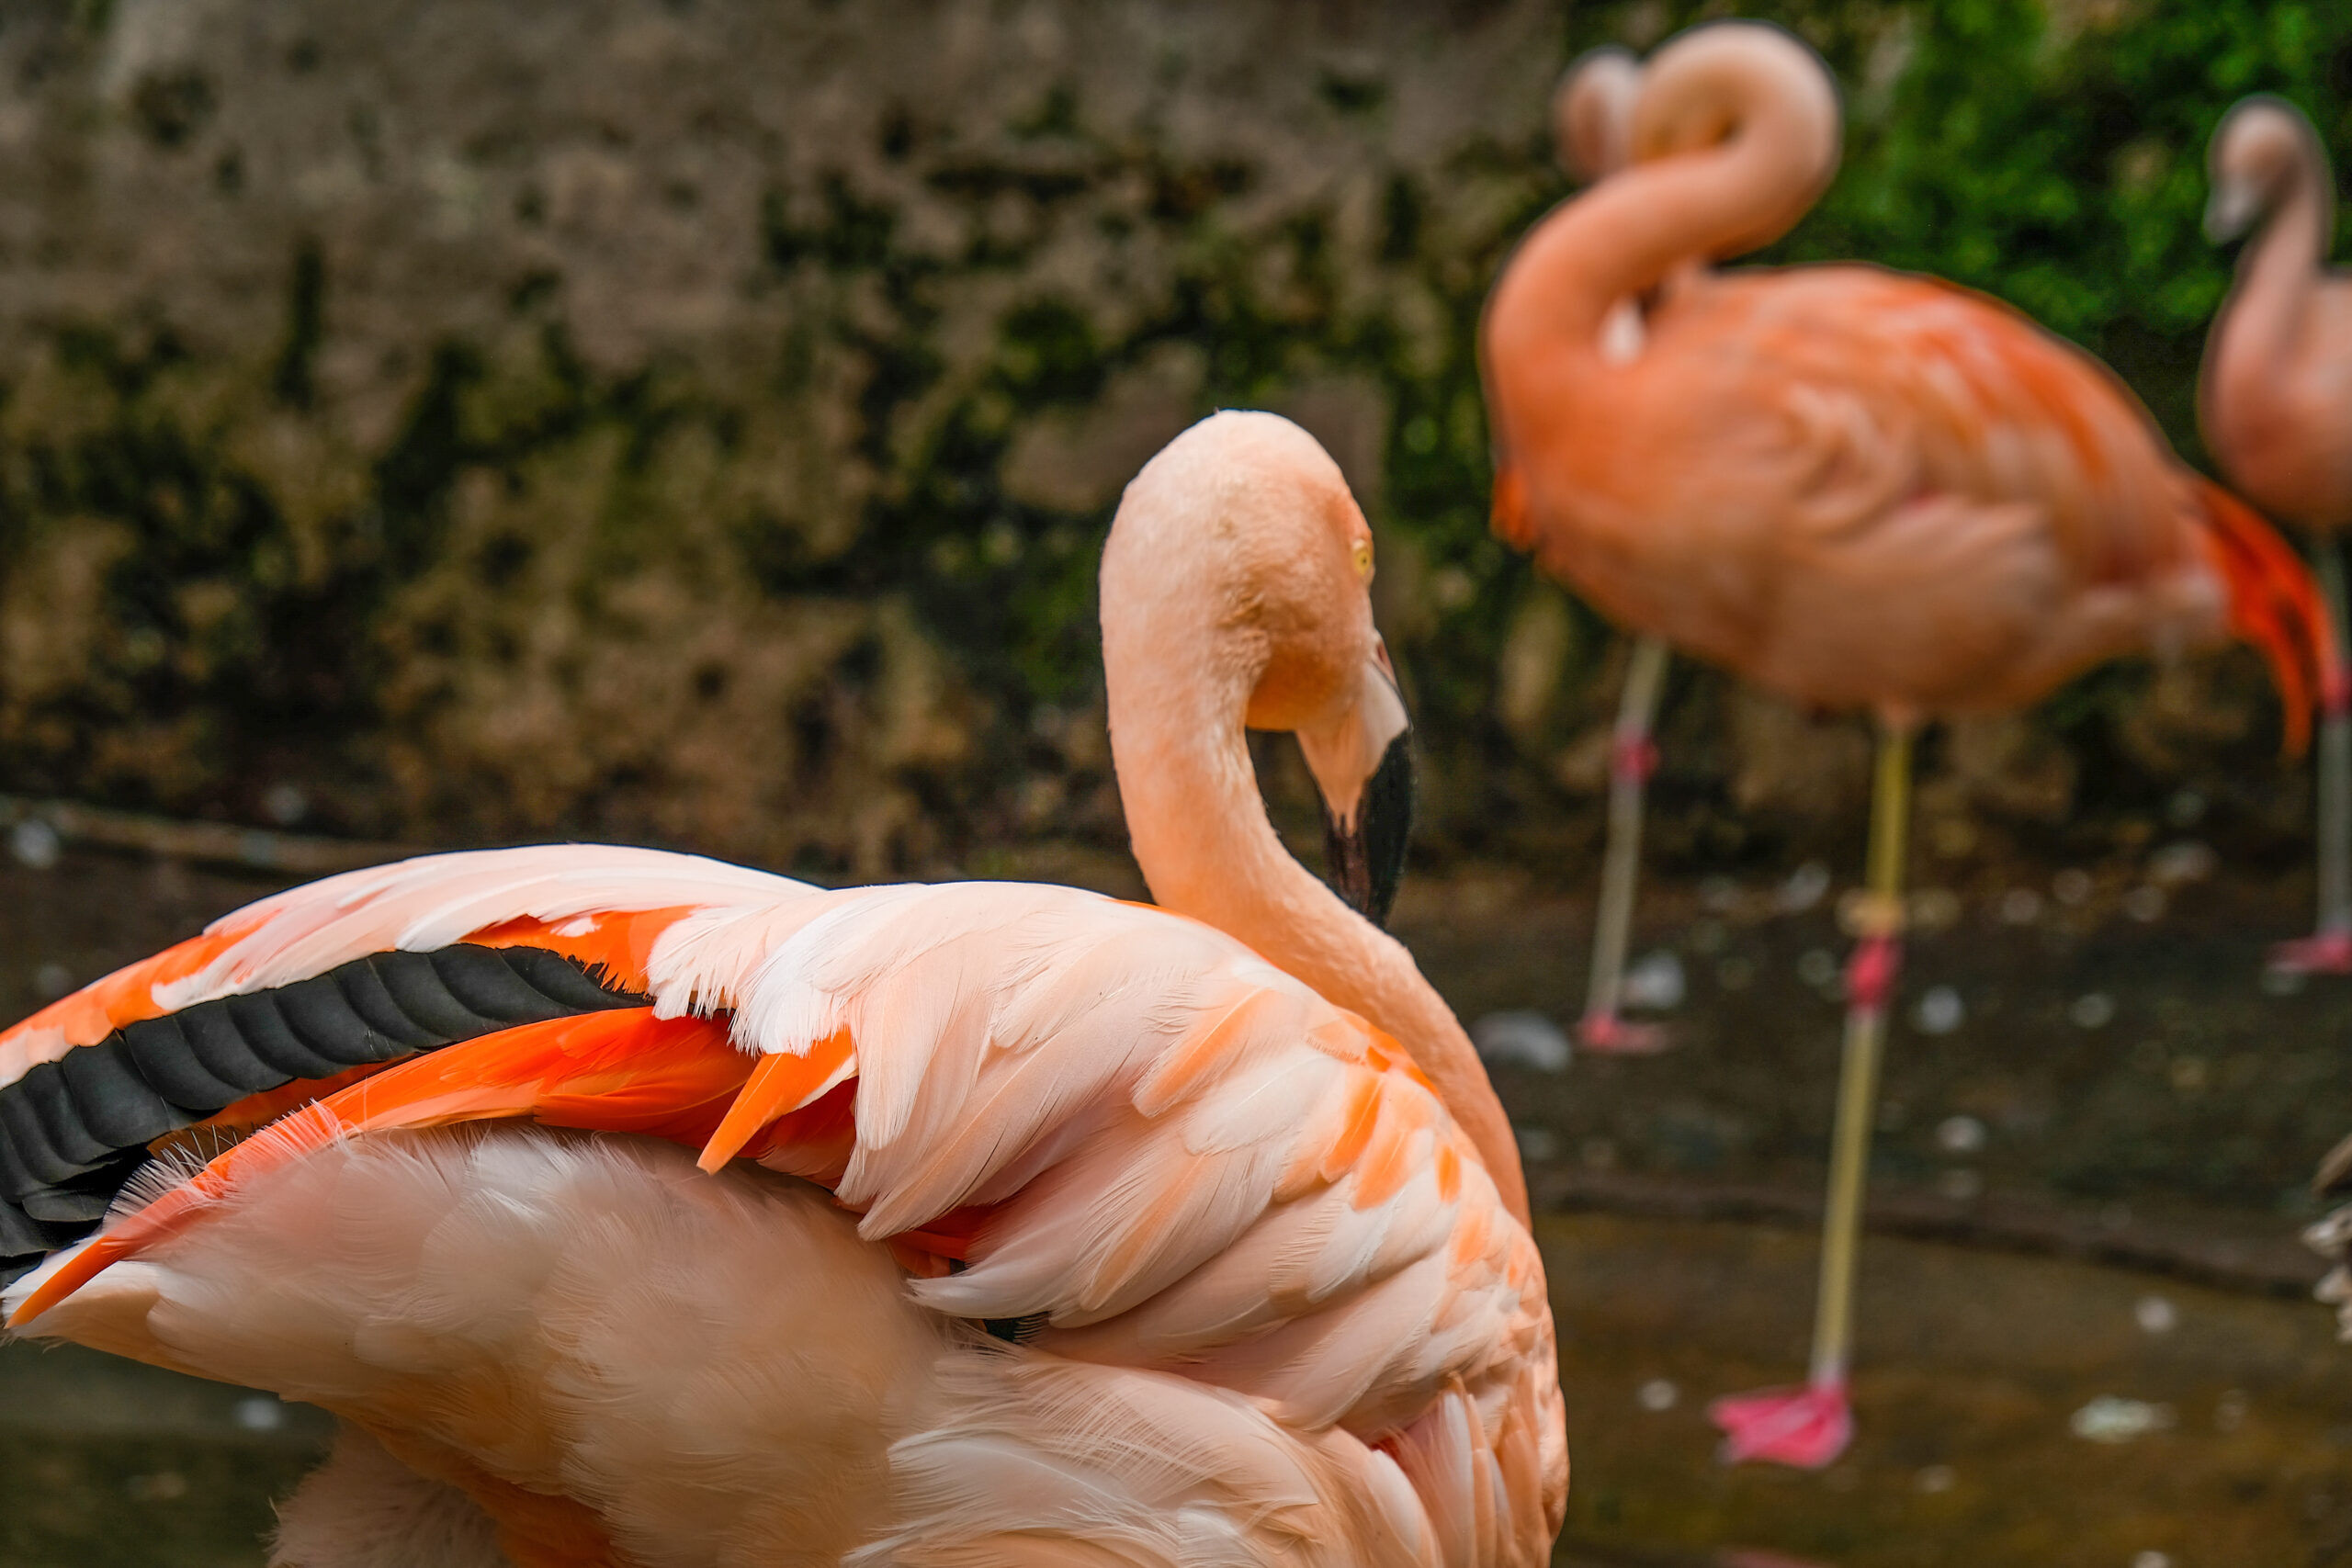 Gay flamingo couple breaks up after Pride month shenanigans